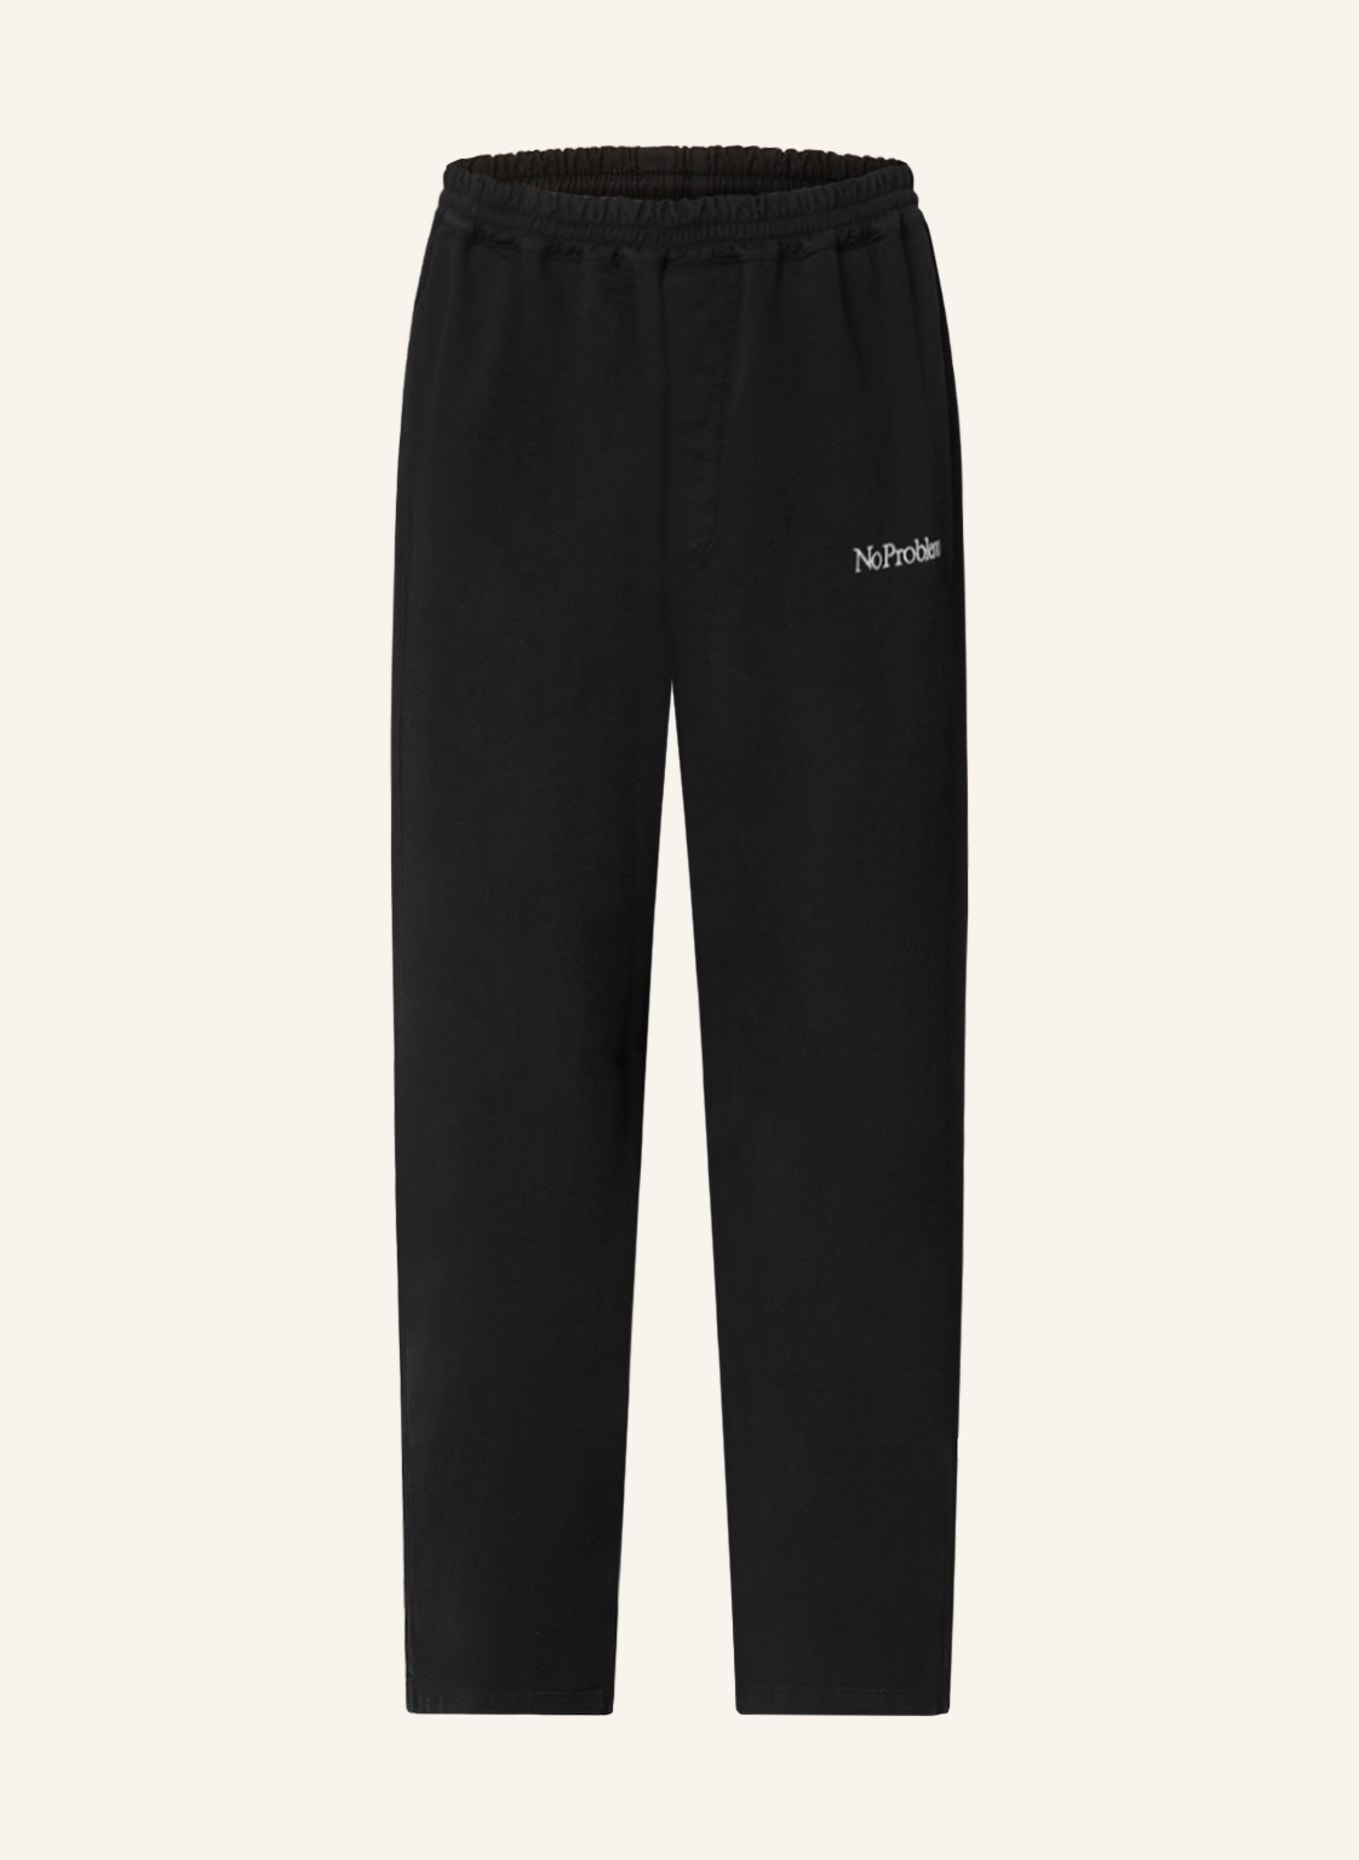 Aries Arise Pants in jogger style, Color: BLACK (Image 1)